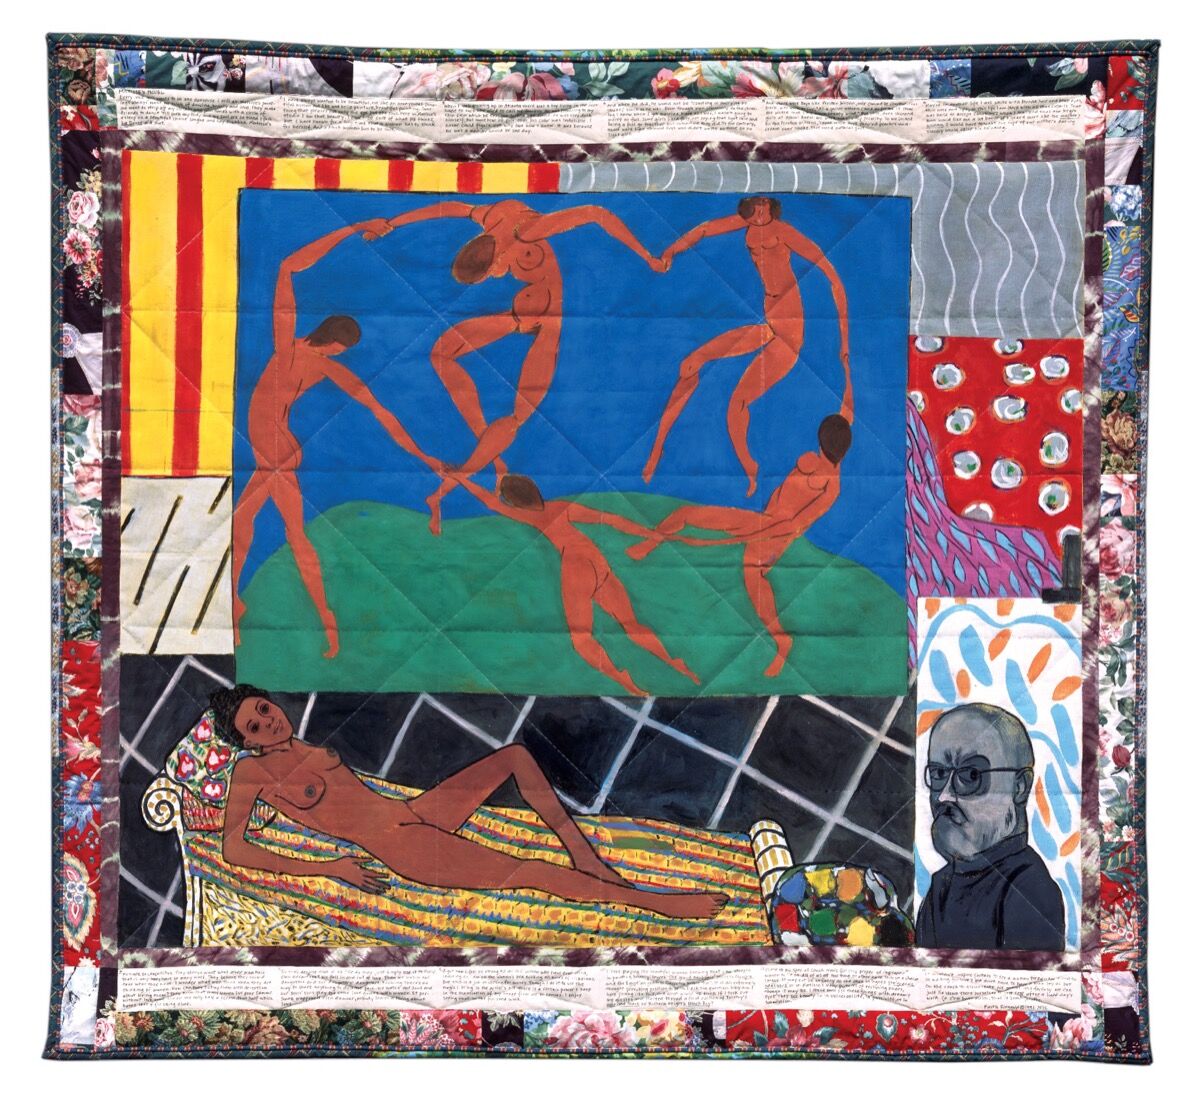 Faith Ringgold, Matisse’s Model: The French Collection Part I, #5, 1991. © Faith Ringgold / ARS and DACS. Courtesy of the artist and ACA Galleries.